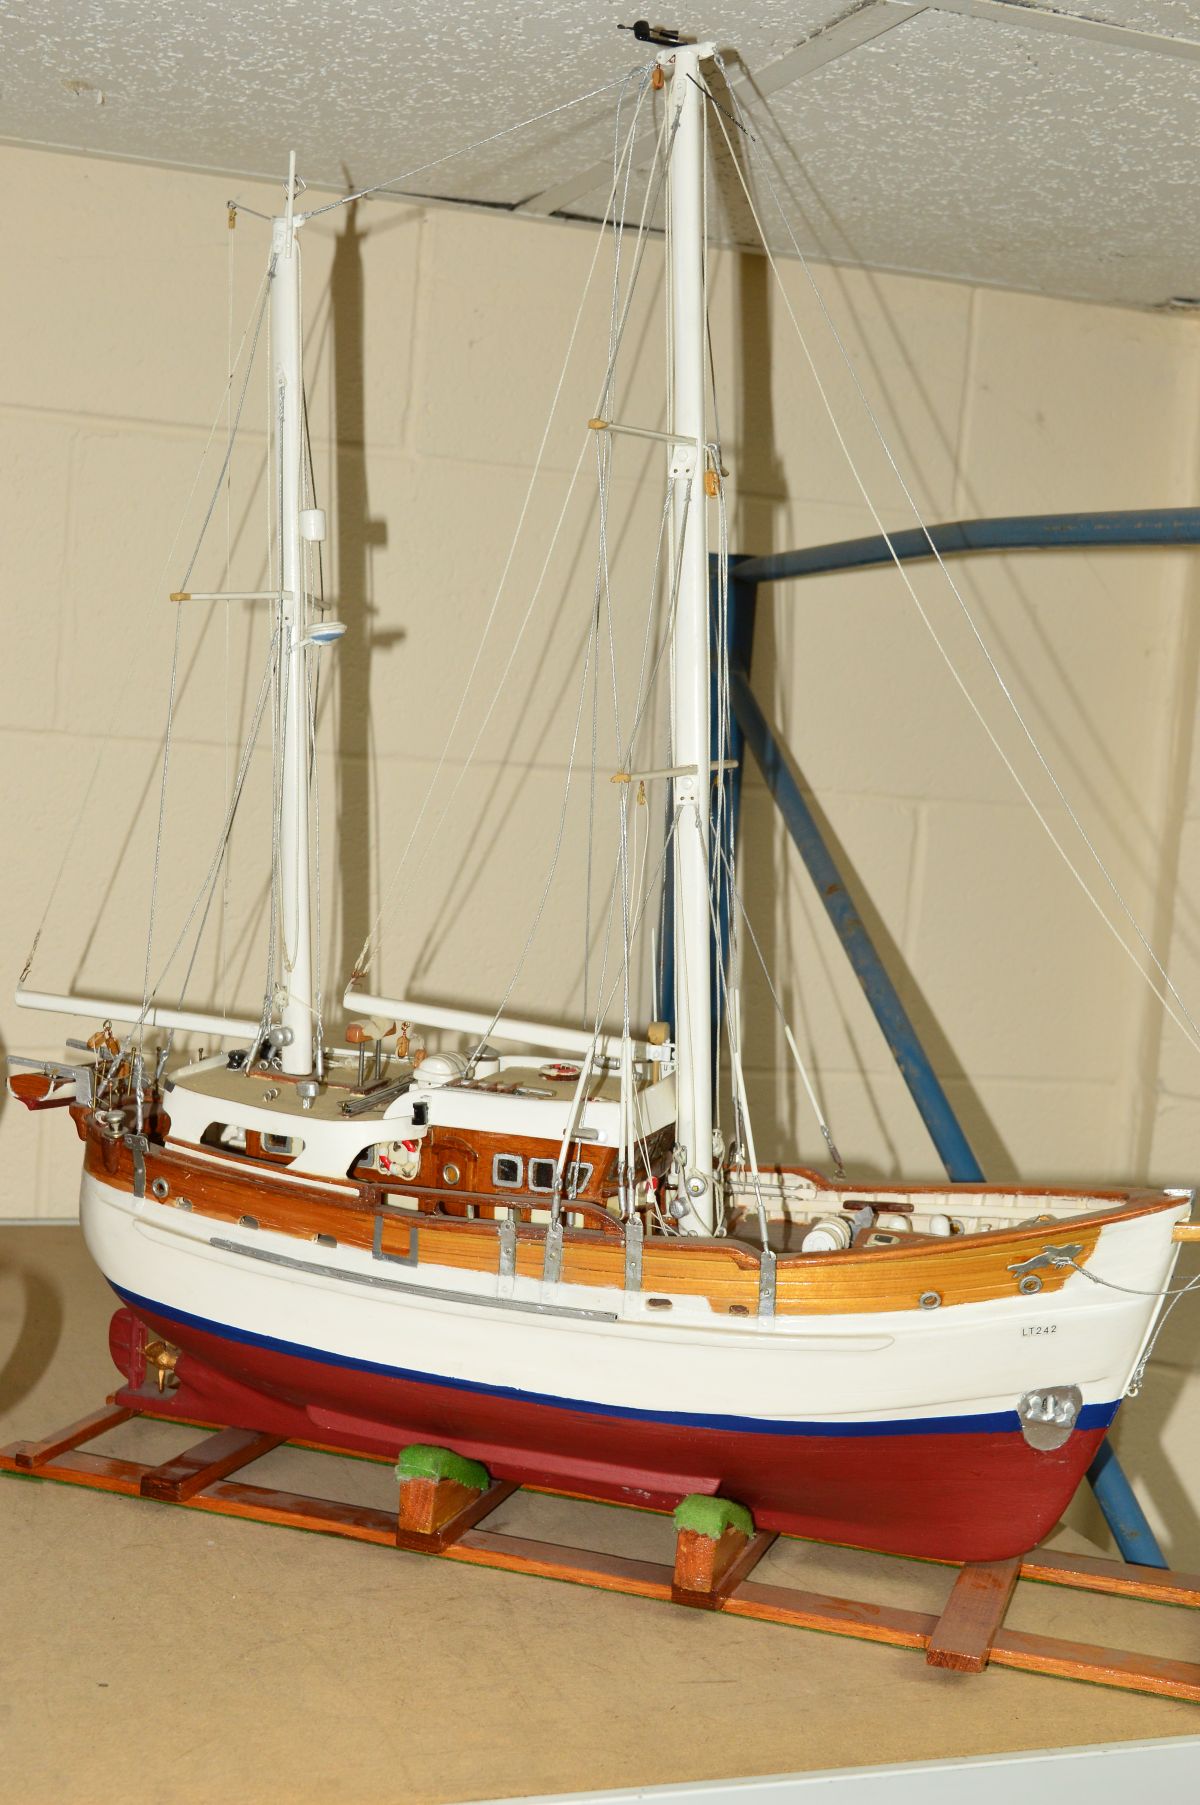 A WOODEN SCRATCH BUILT MODEL OF A FISHING VESSEL painted red and white on a wooden stand,